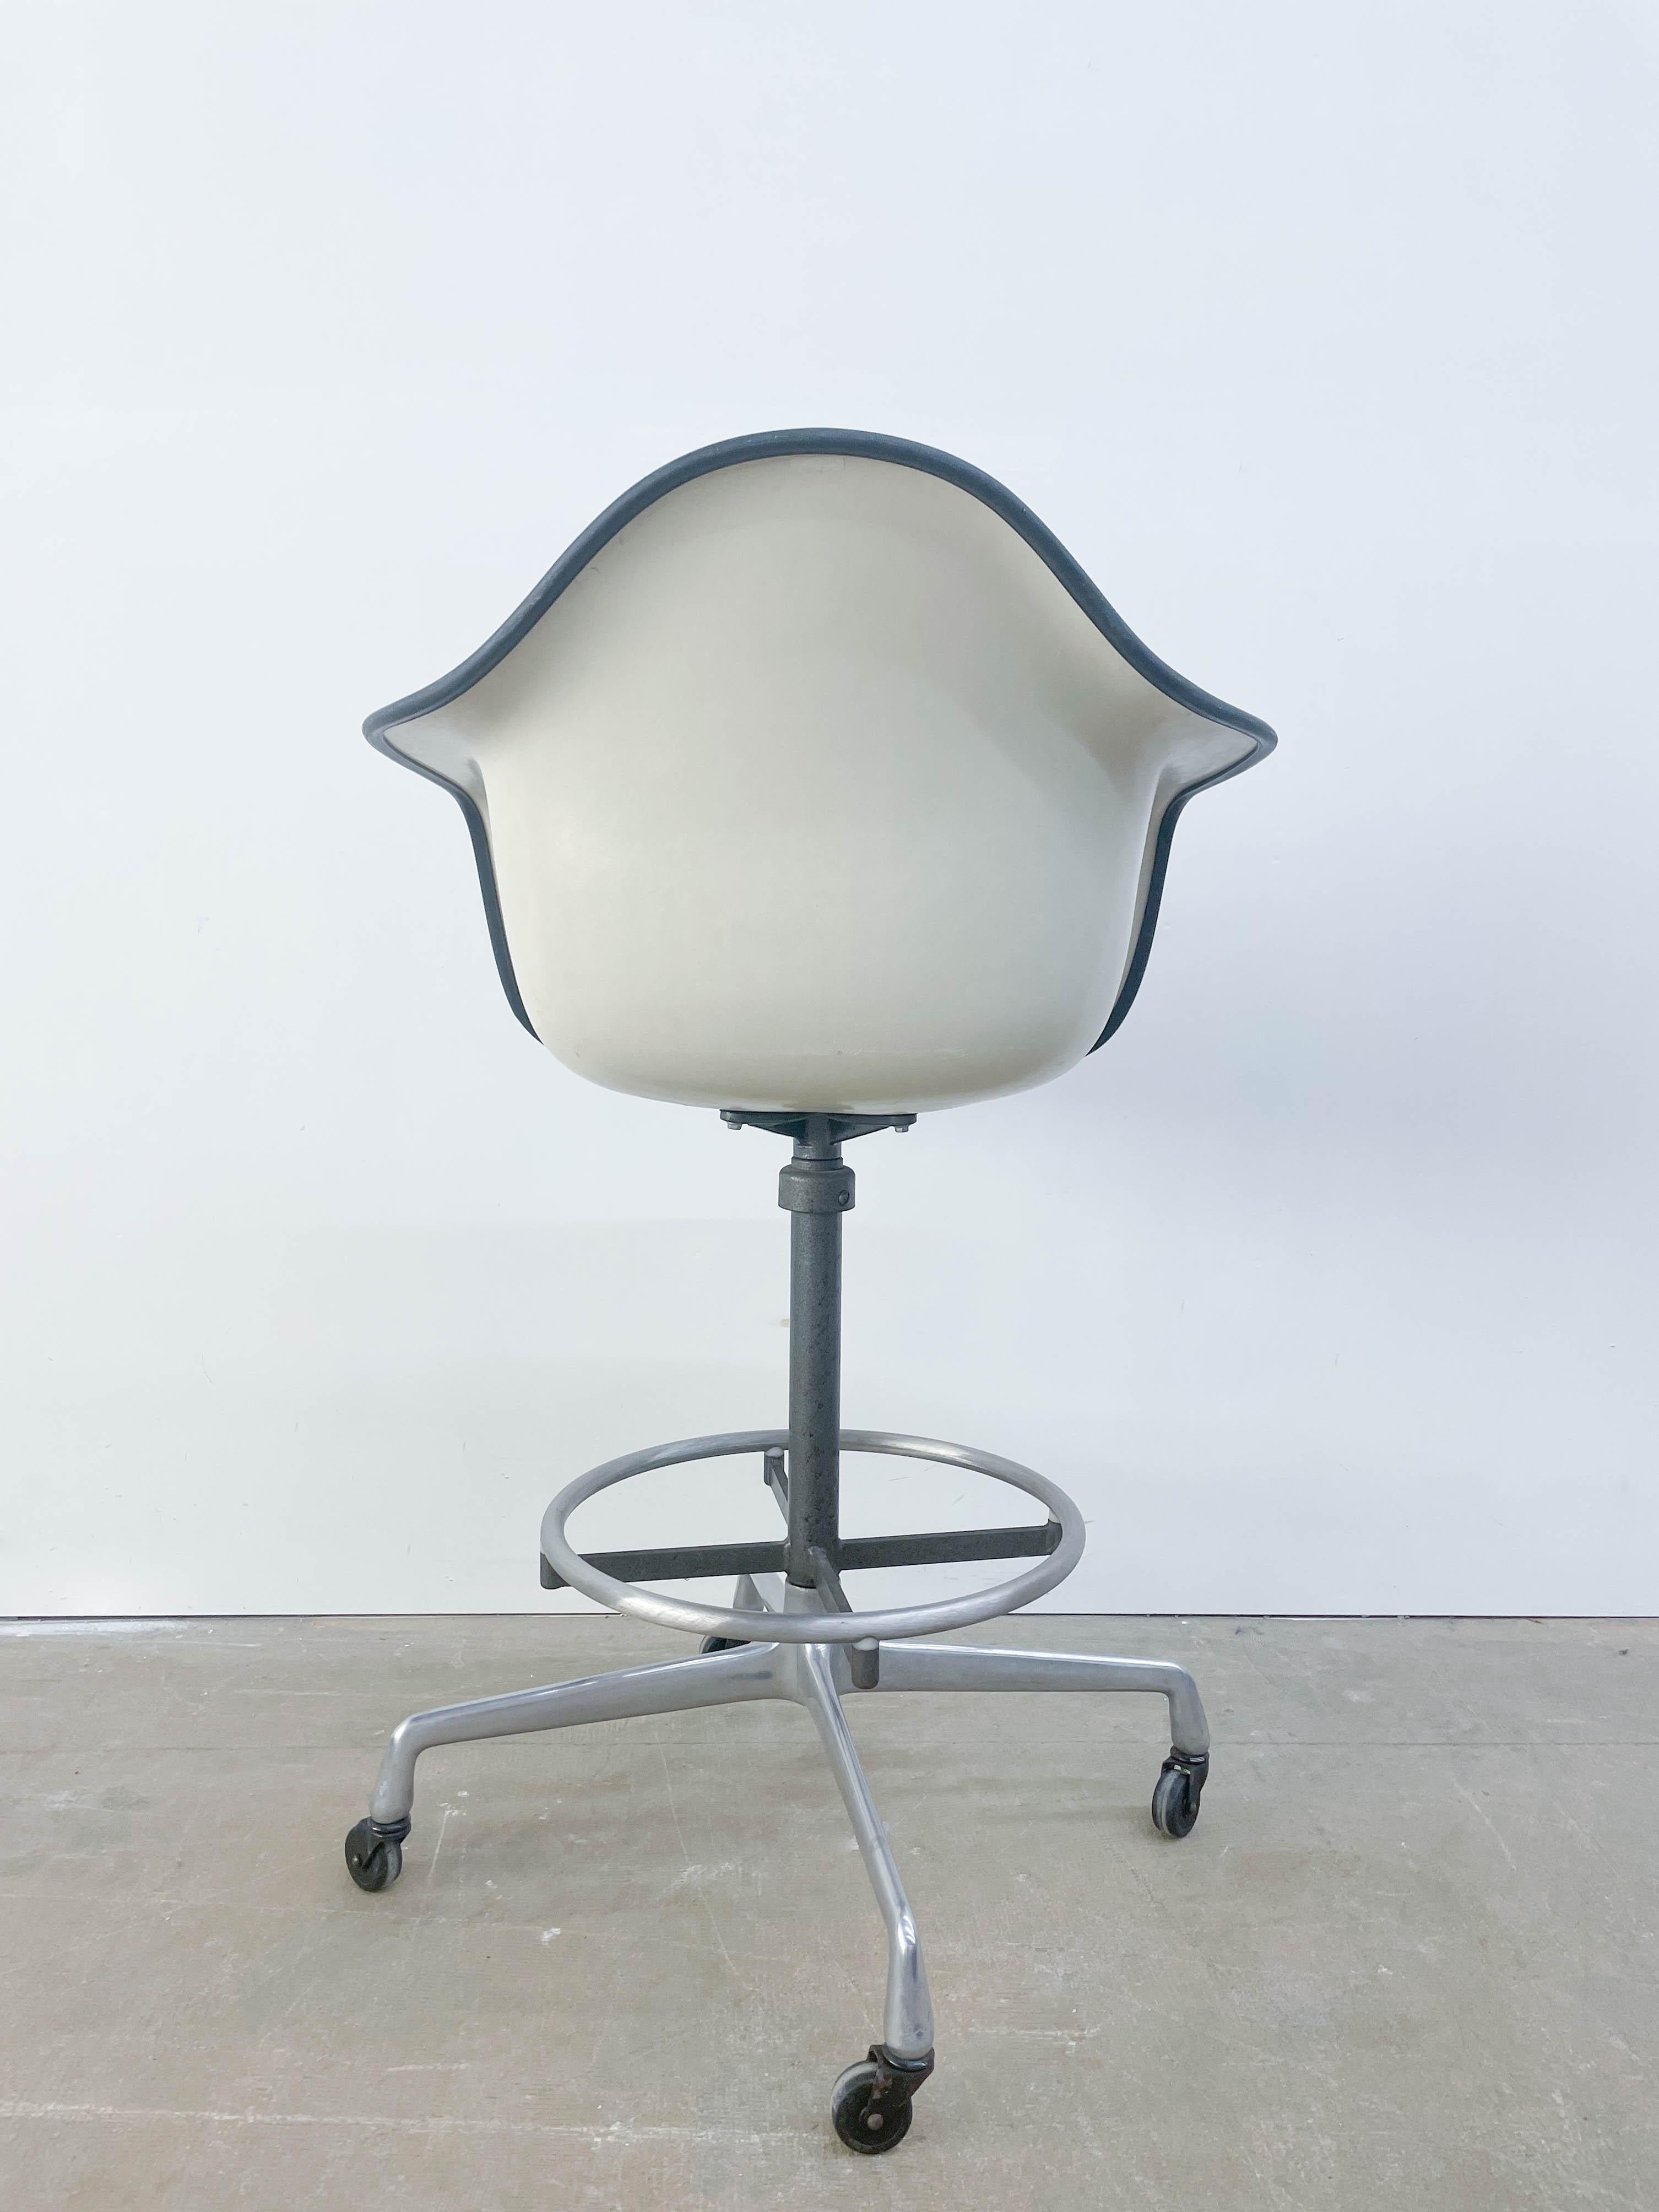 Eames Designer's Swivel Stool In Good Condition For Sale In Kalamazoo, MI